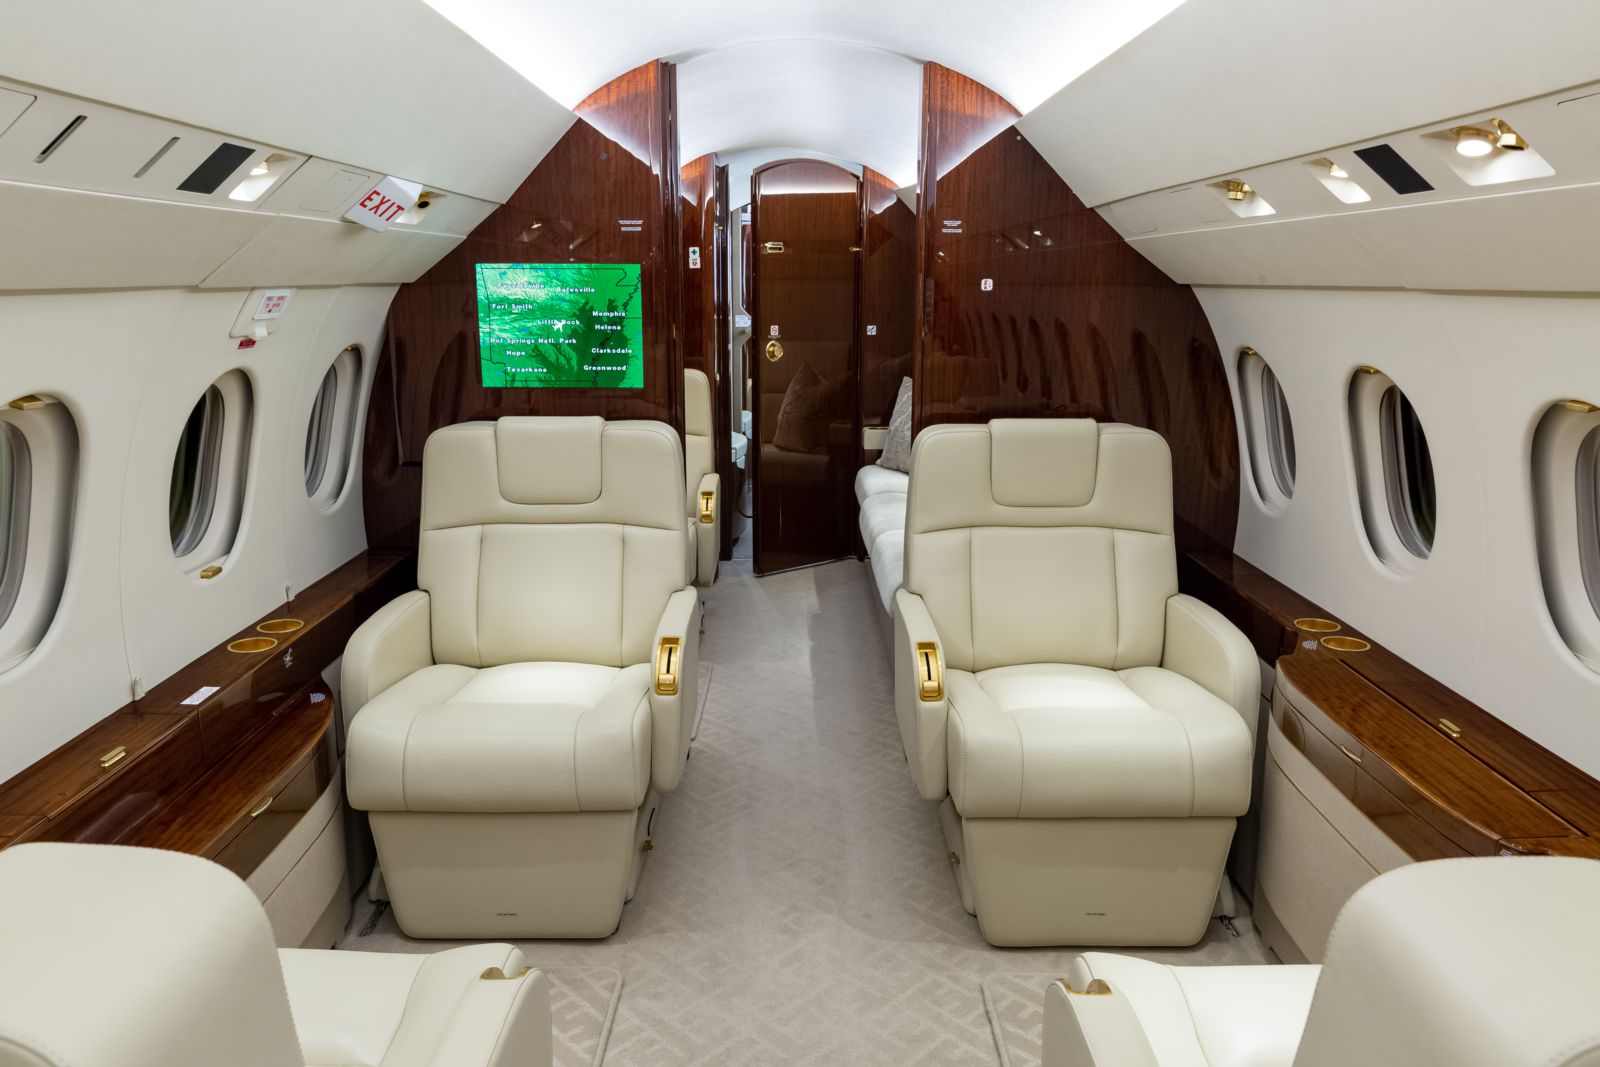 Dassault Falcon 900EX EASy  S/N 188 for sale | gallery image: /userfiles/images/F900EXy%20SN%20188/a%20mid%20aft.jpg